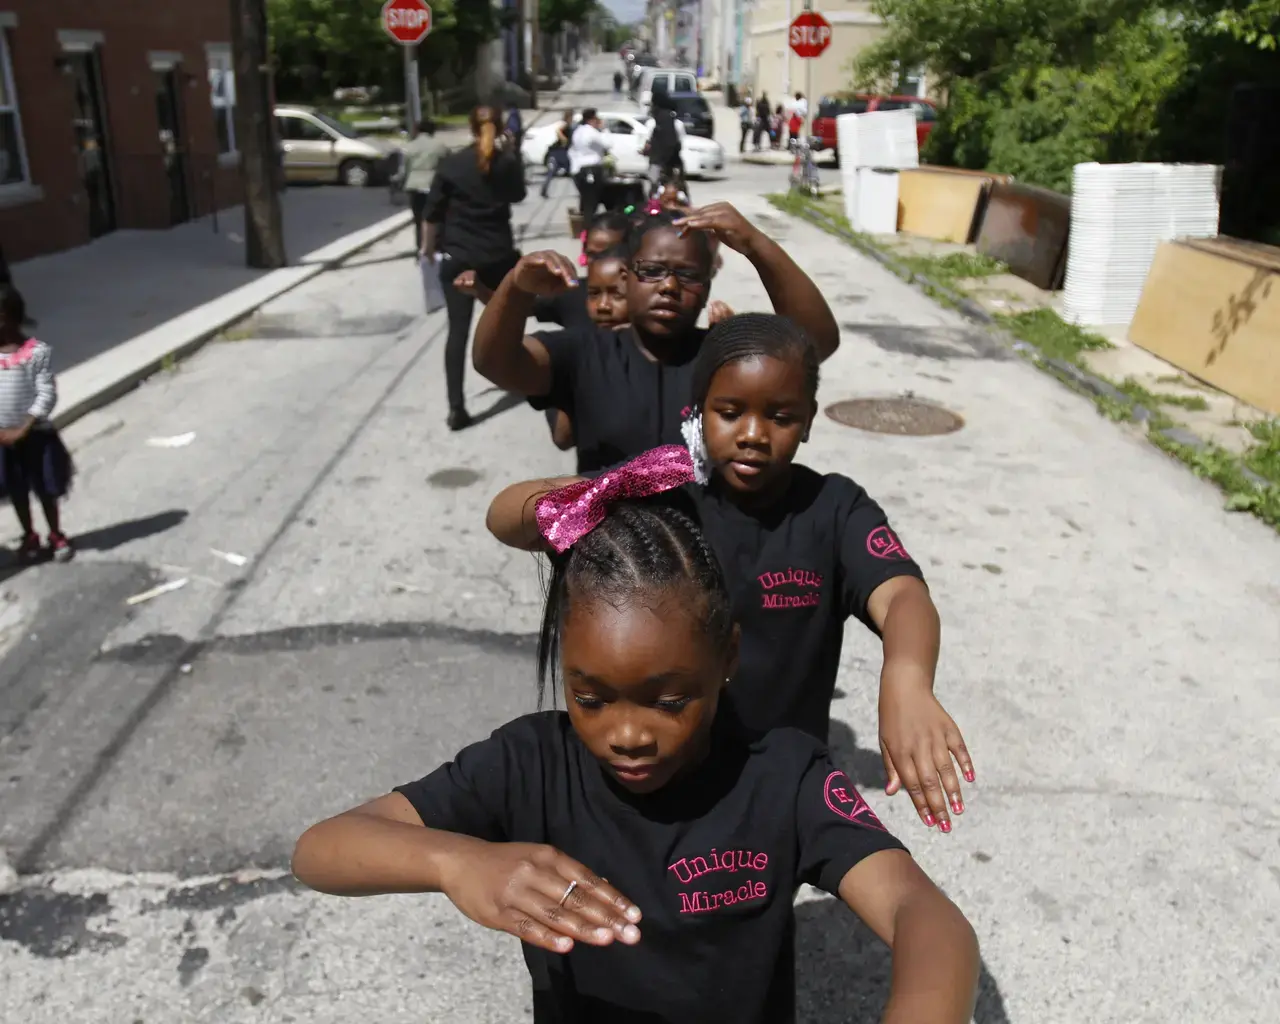 Members of local drill team Unique Miracles prepare to perform in a neighborhood procession near 3711 Melon Street, Saturday, May 31, 2014. Photo: AP/Jessica Kourkounis.